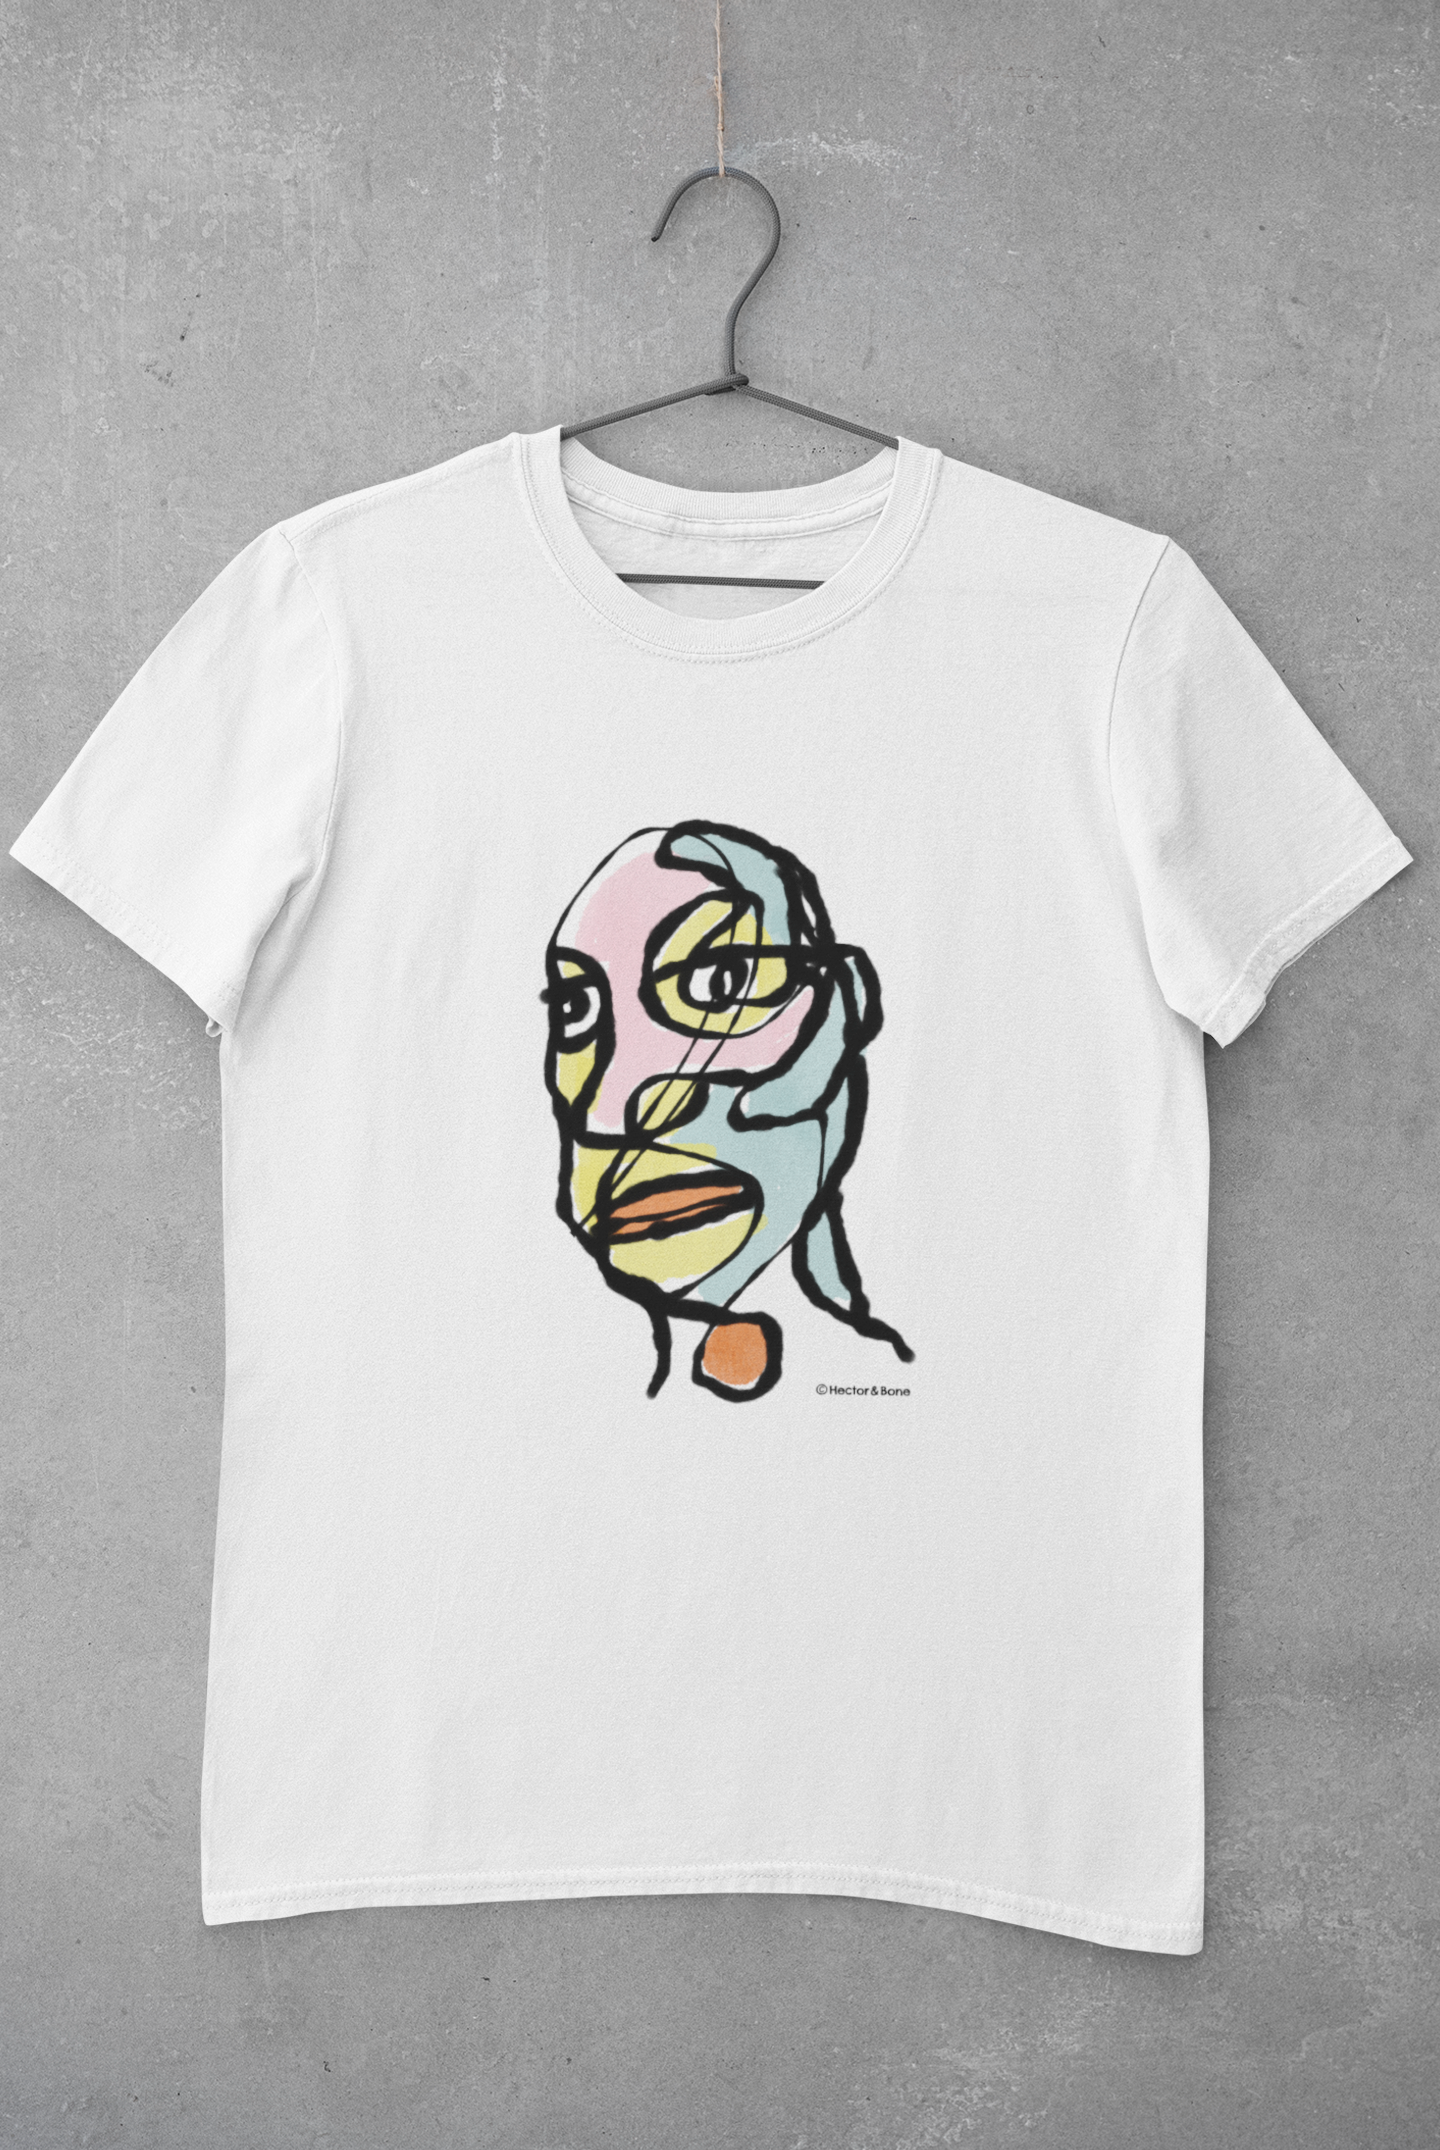 Abstract man portrait t-shirt - Edgy Eddie abstract man's face illustrated on a vegan white cotton t-shirt by Hector and Bone